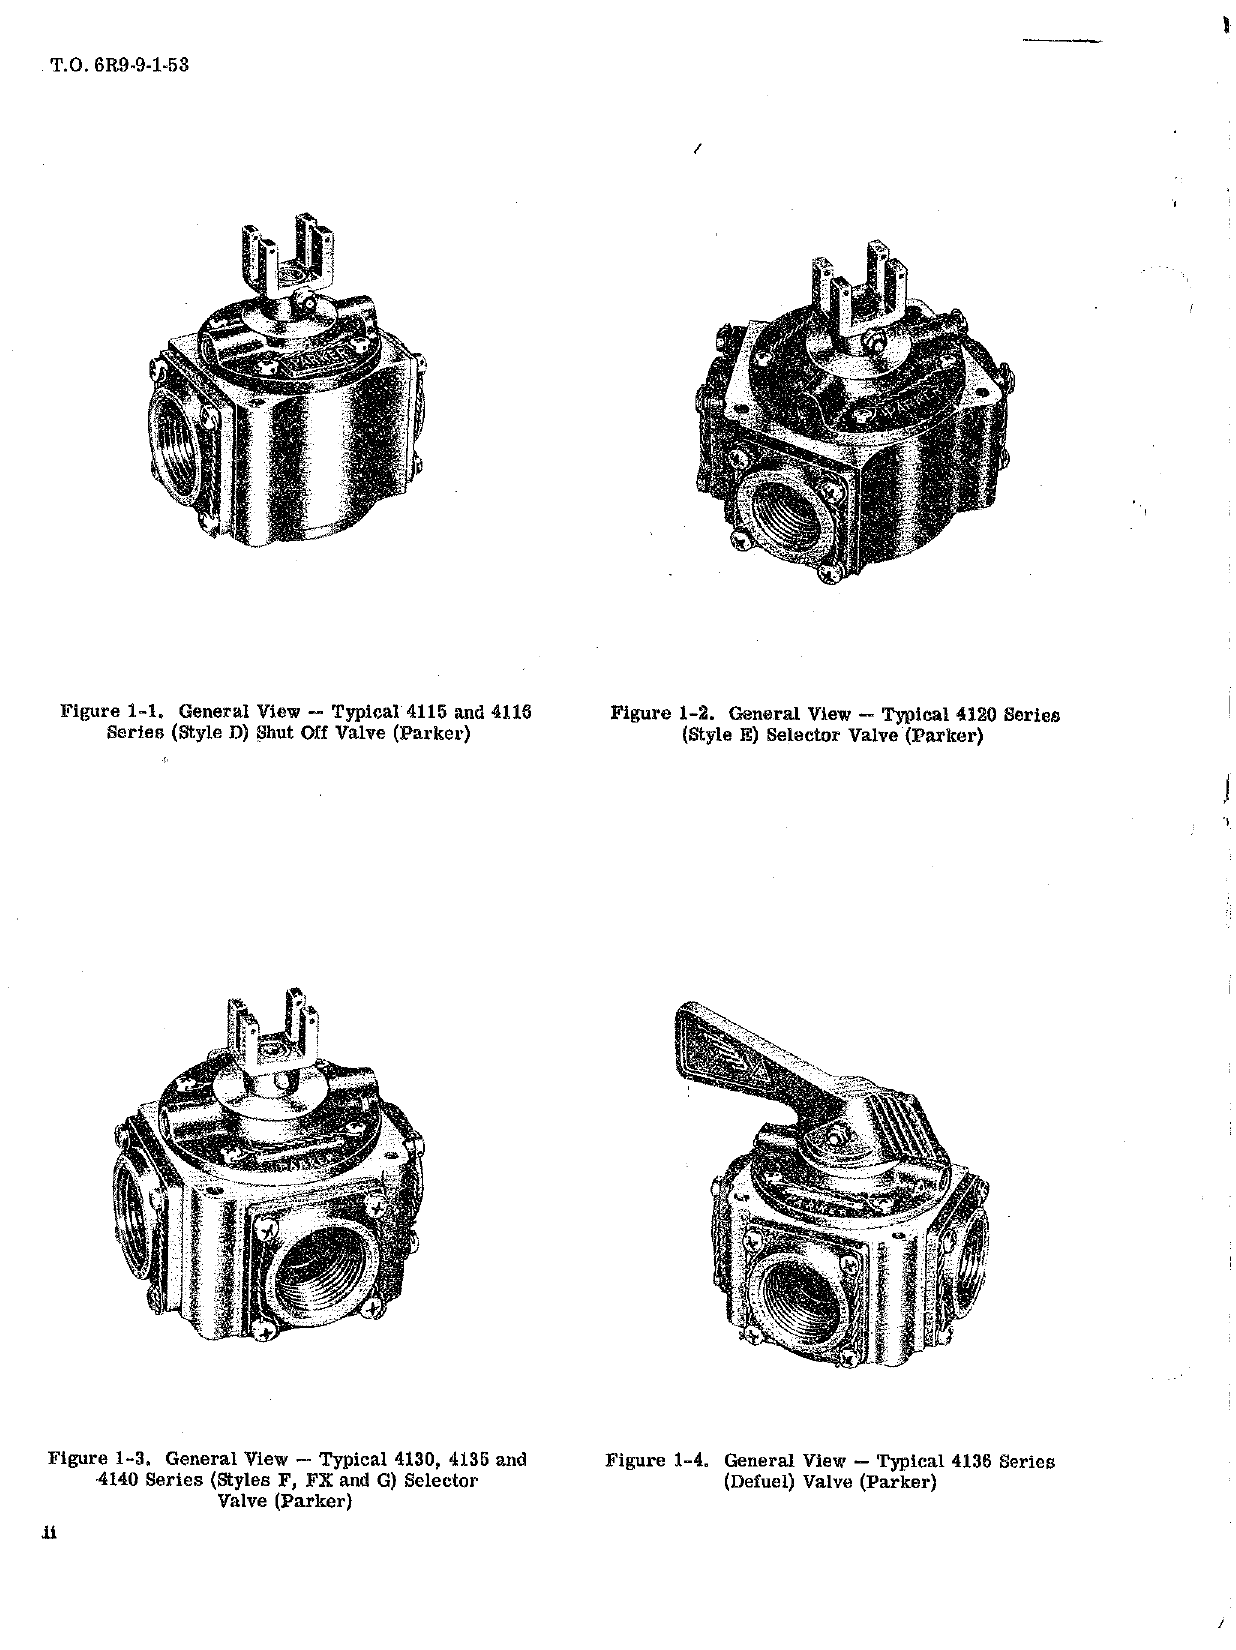 Sample page 4 from AirCorps Library document: Technical Manual for Selector Valves